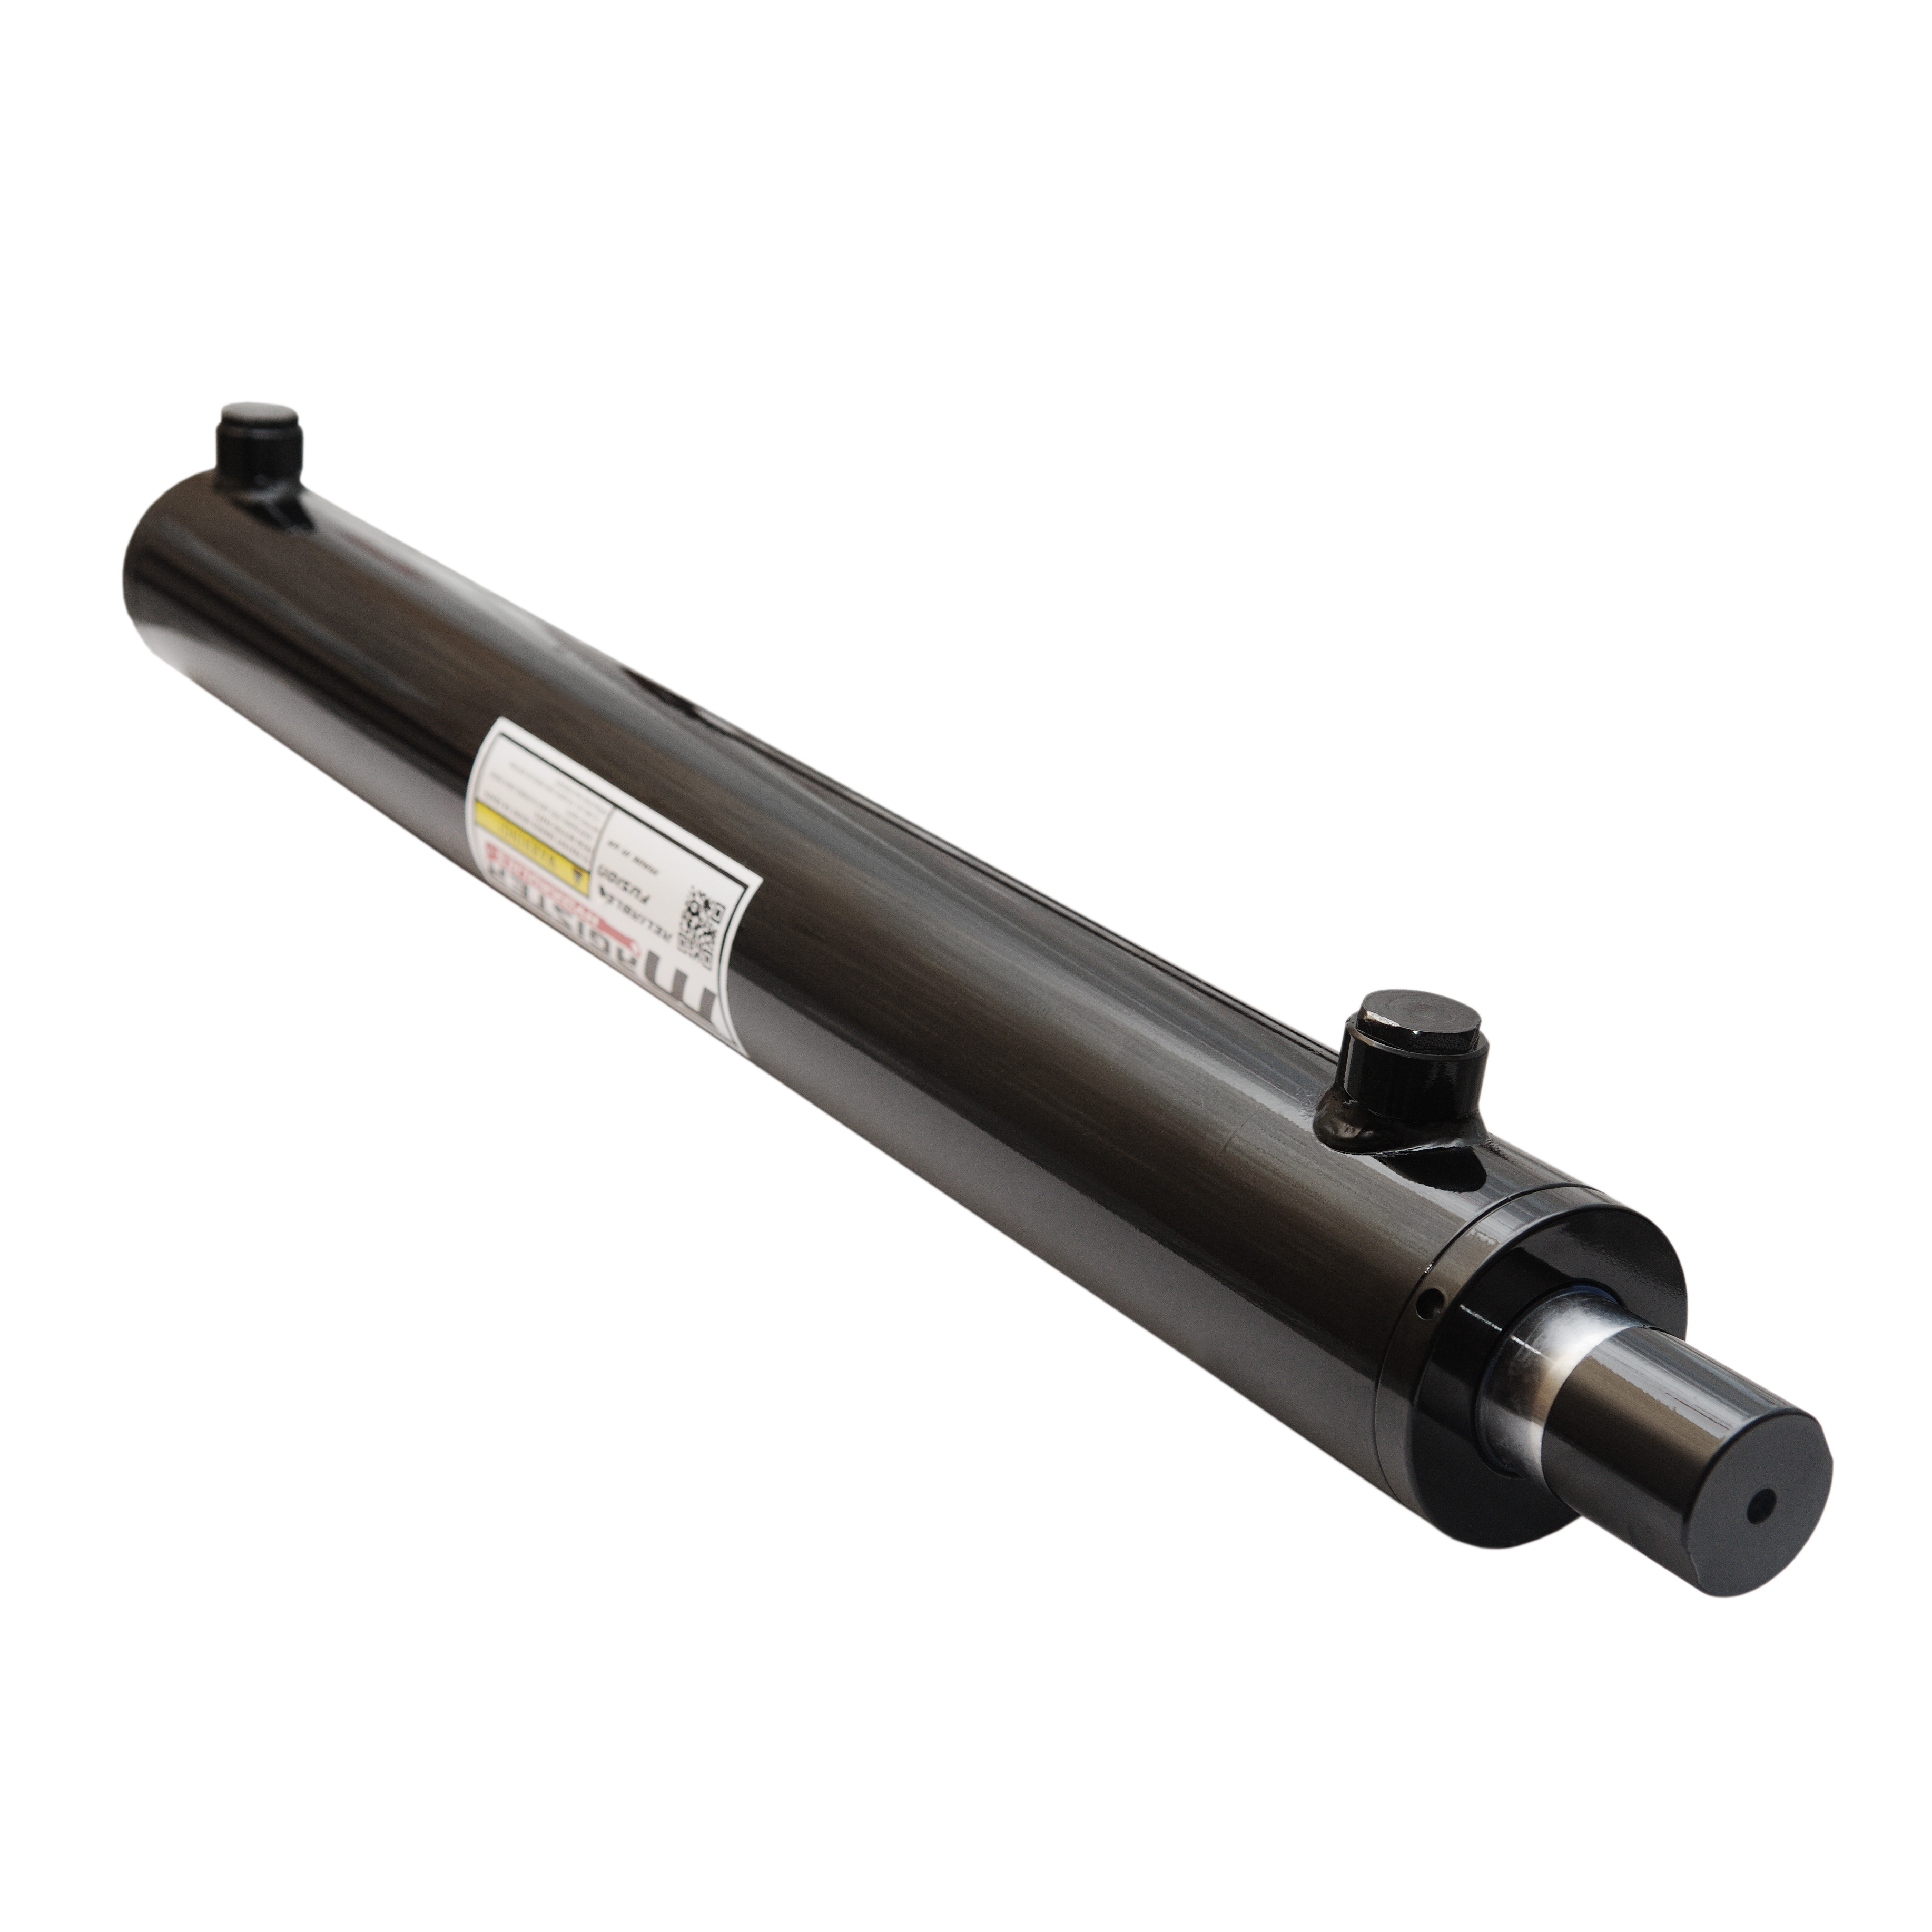 2.5 bore x 18 stroke hydraulic cylinder, welded universal double acting cylinder | Magister Hydraulics